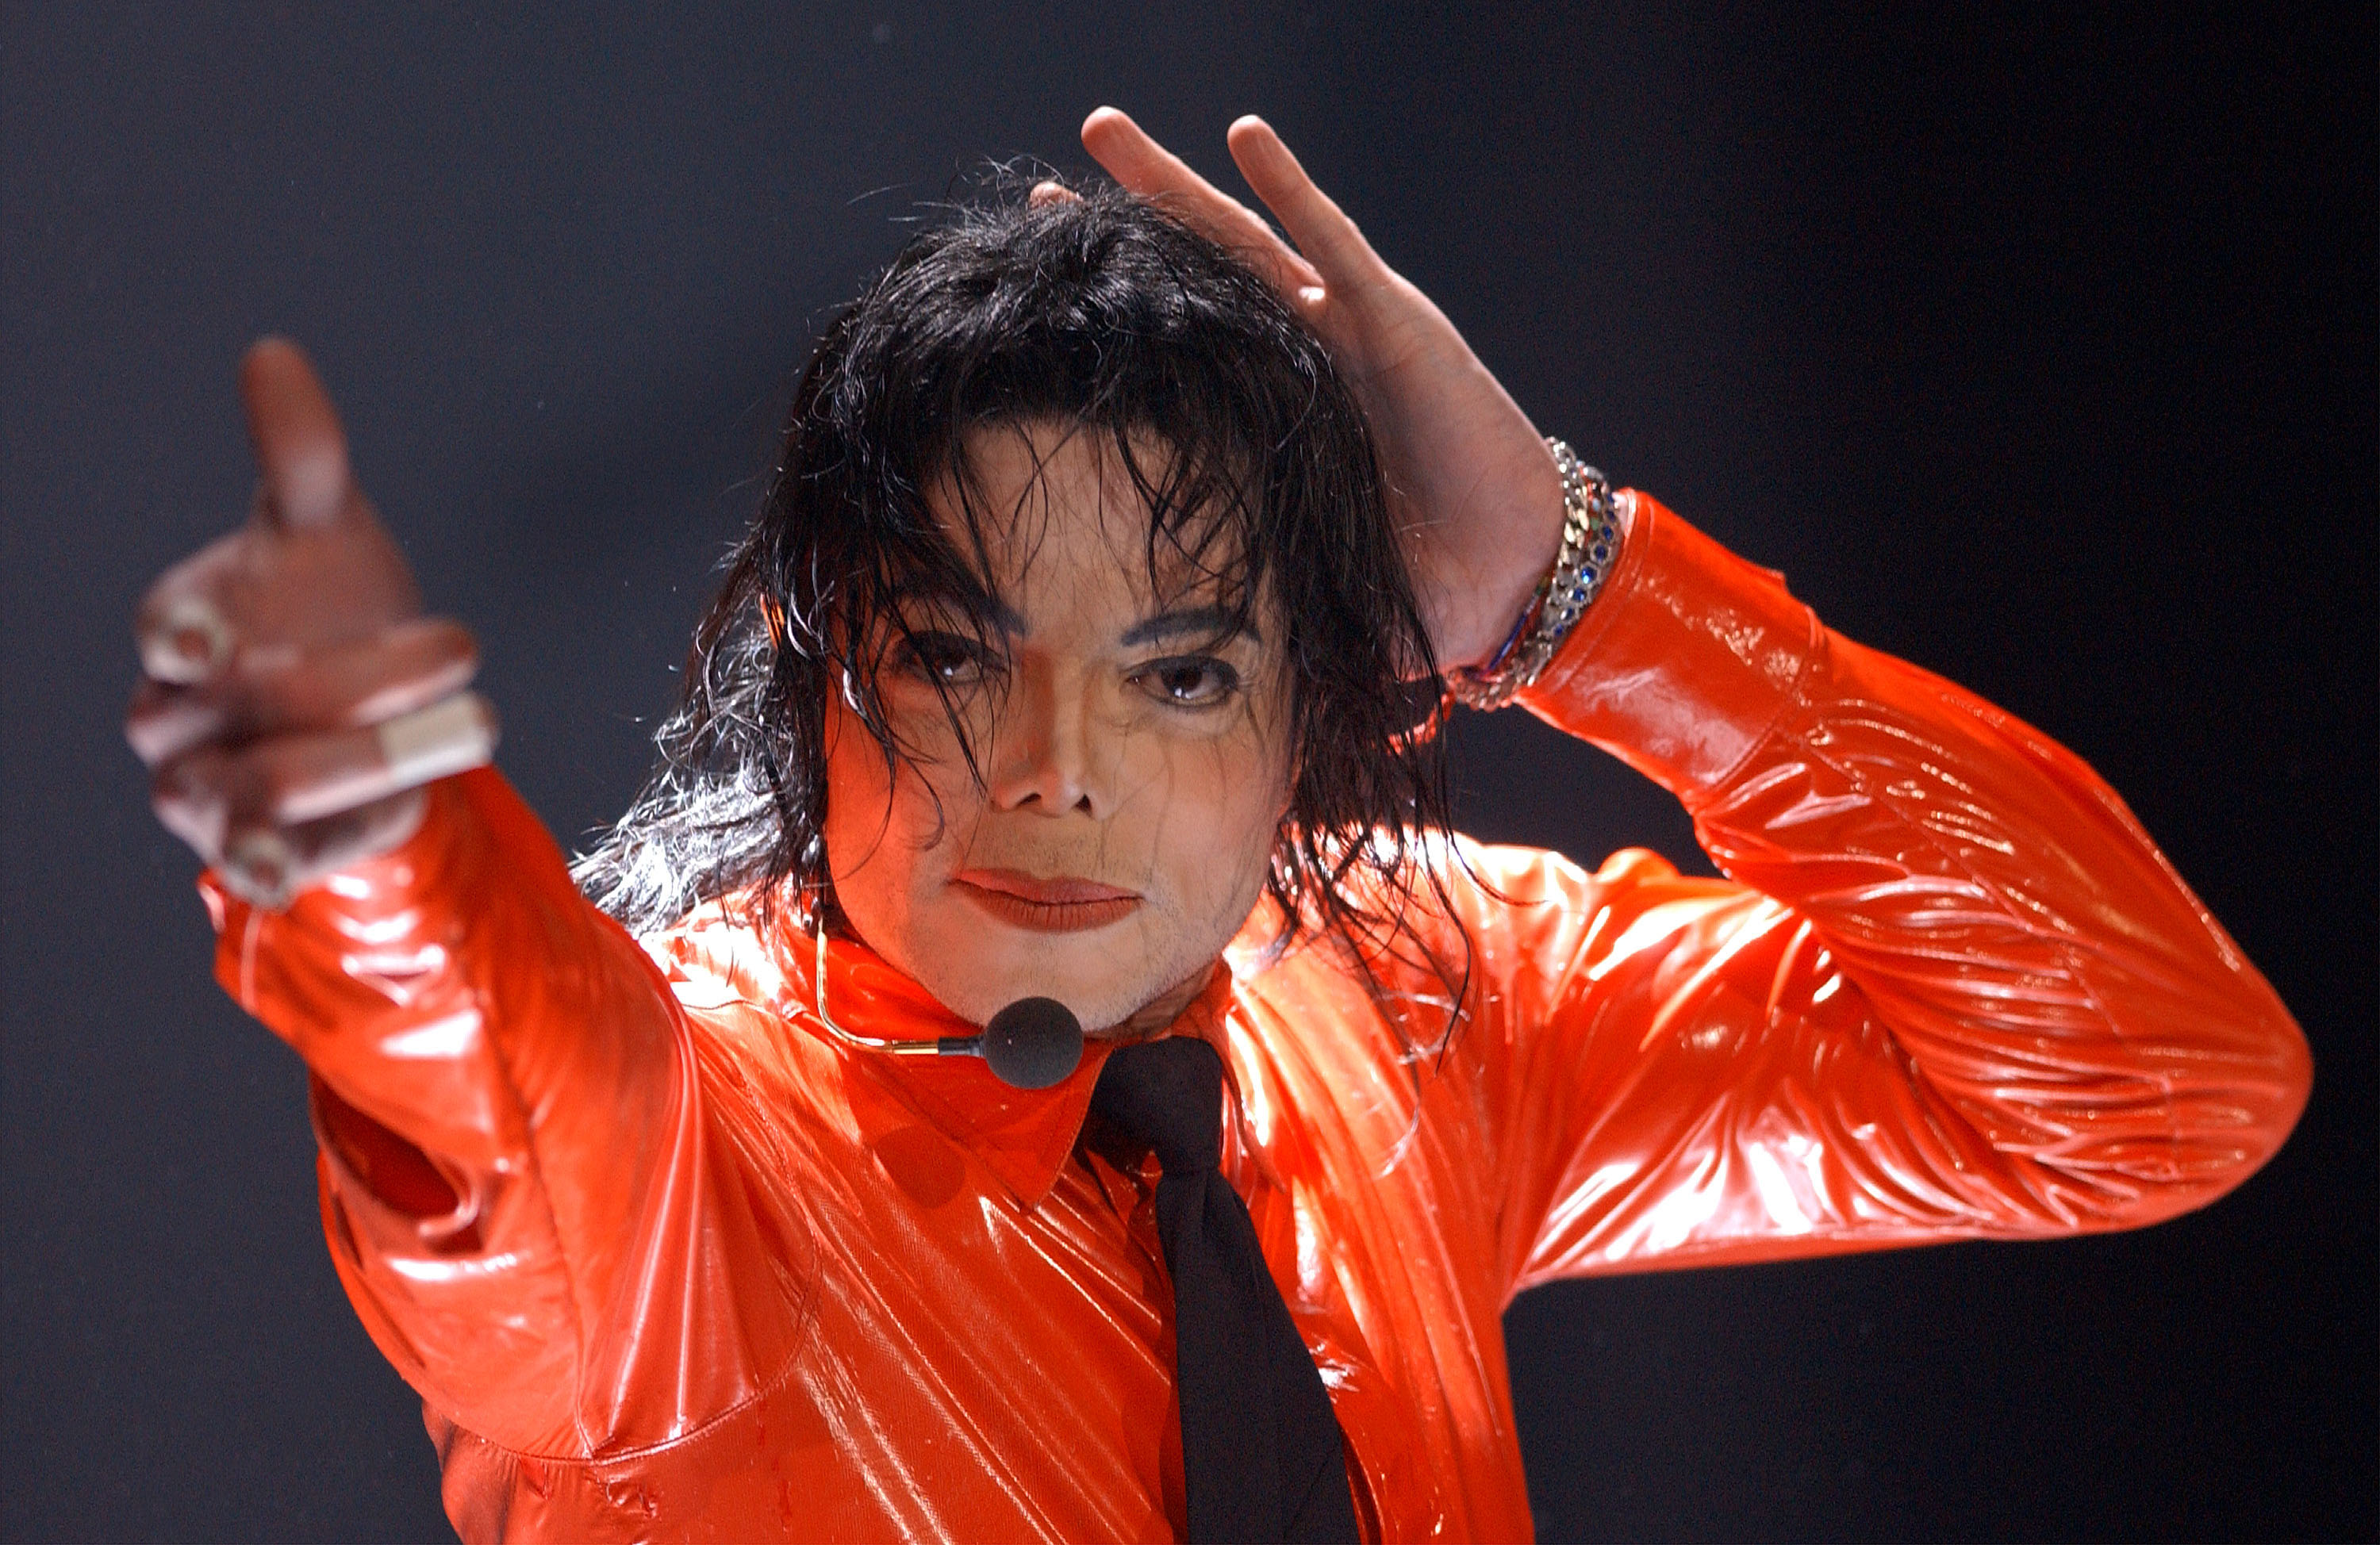 Michael Jackson’s Music Gets Pulled From Radio Stations Worldwide